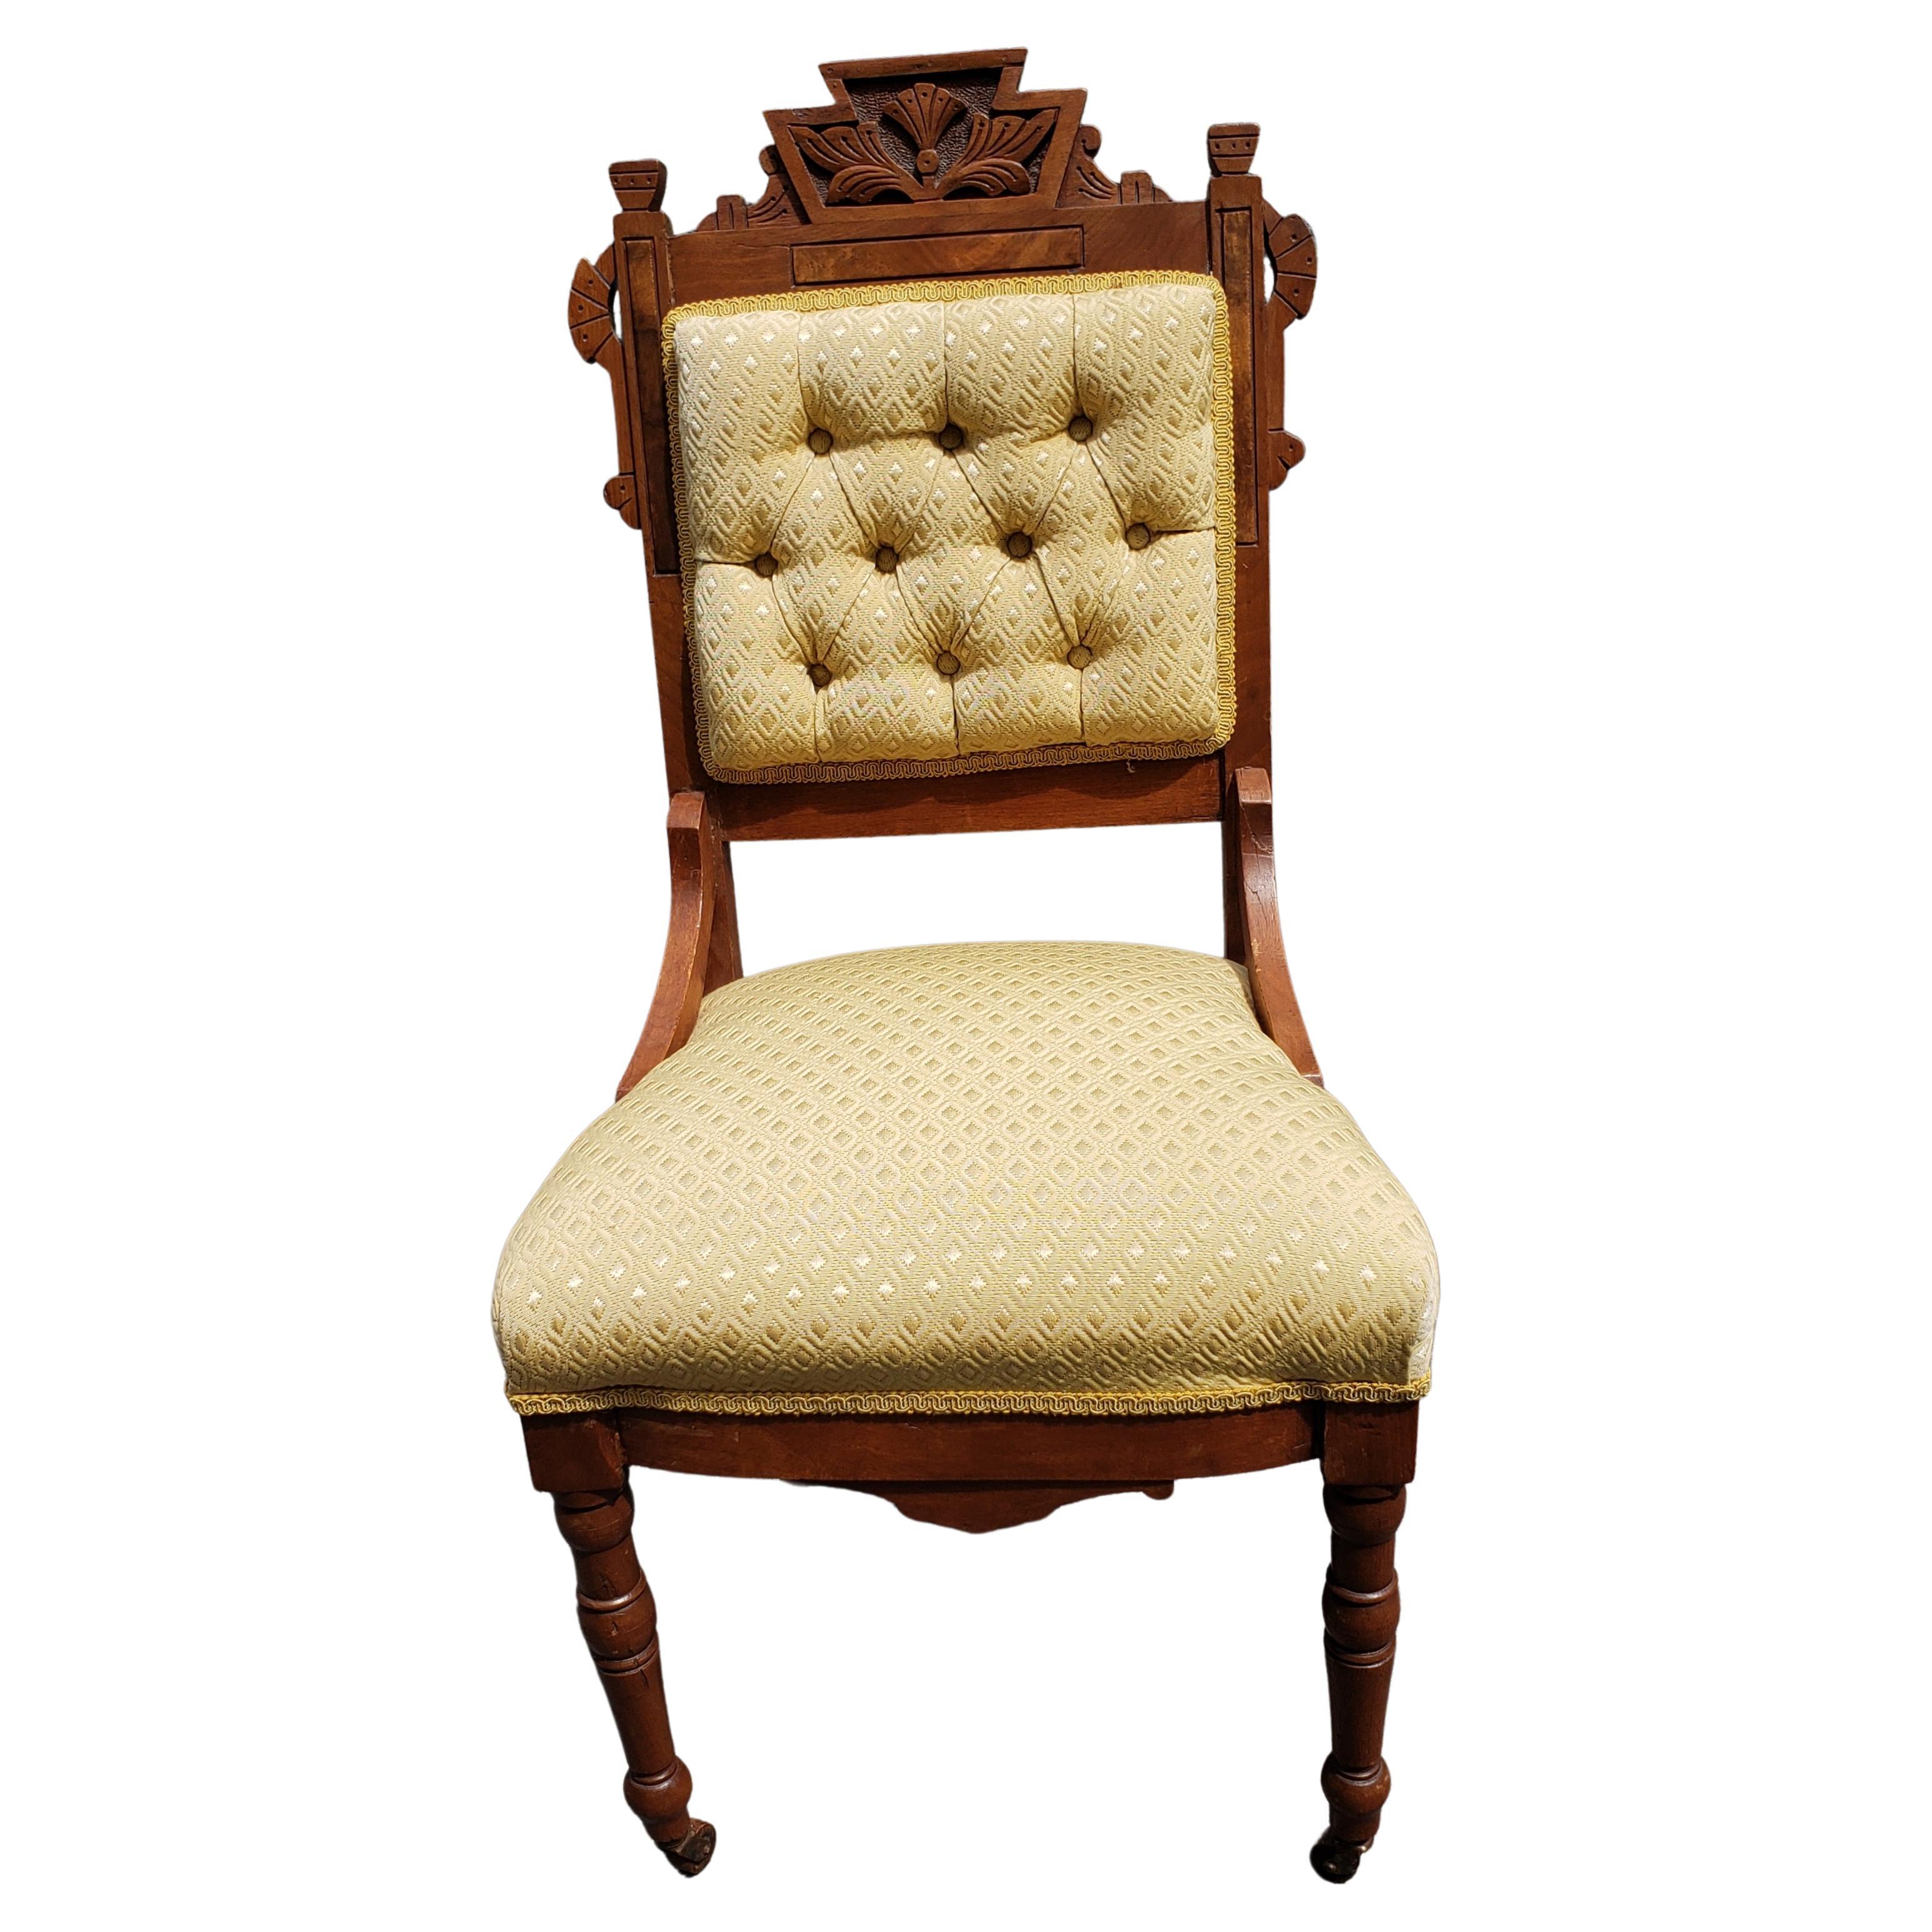 19th Century Antique Victorian Walnut Upholstered Tufted Parlor Chair, Circa 1880s For Sale